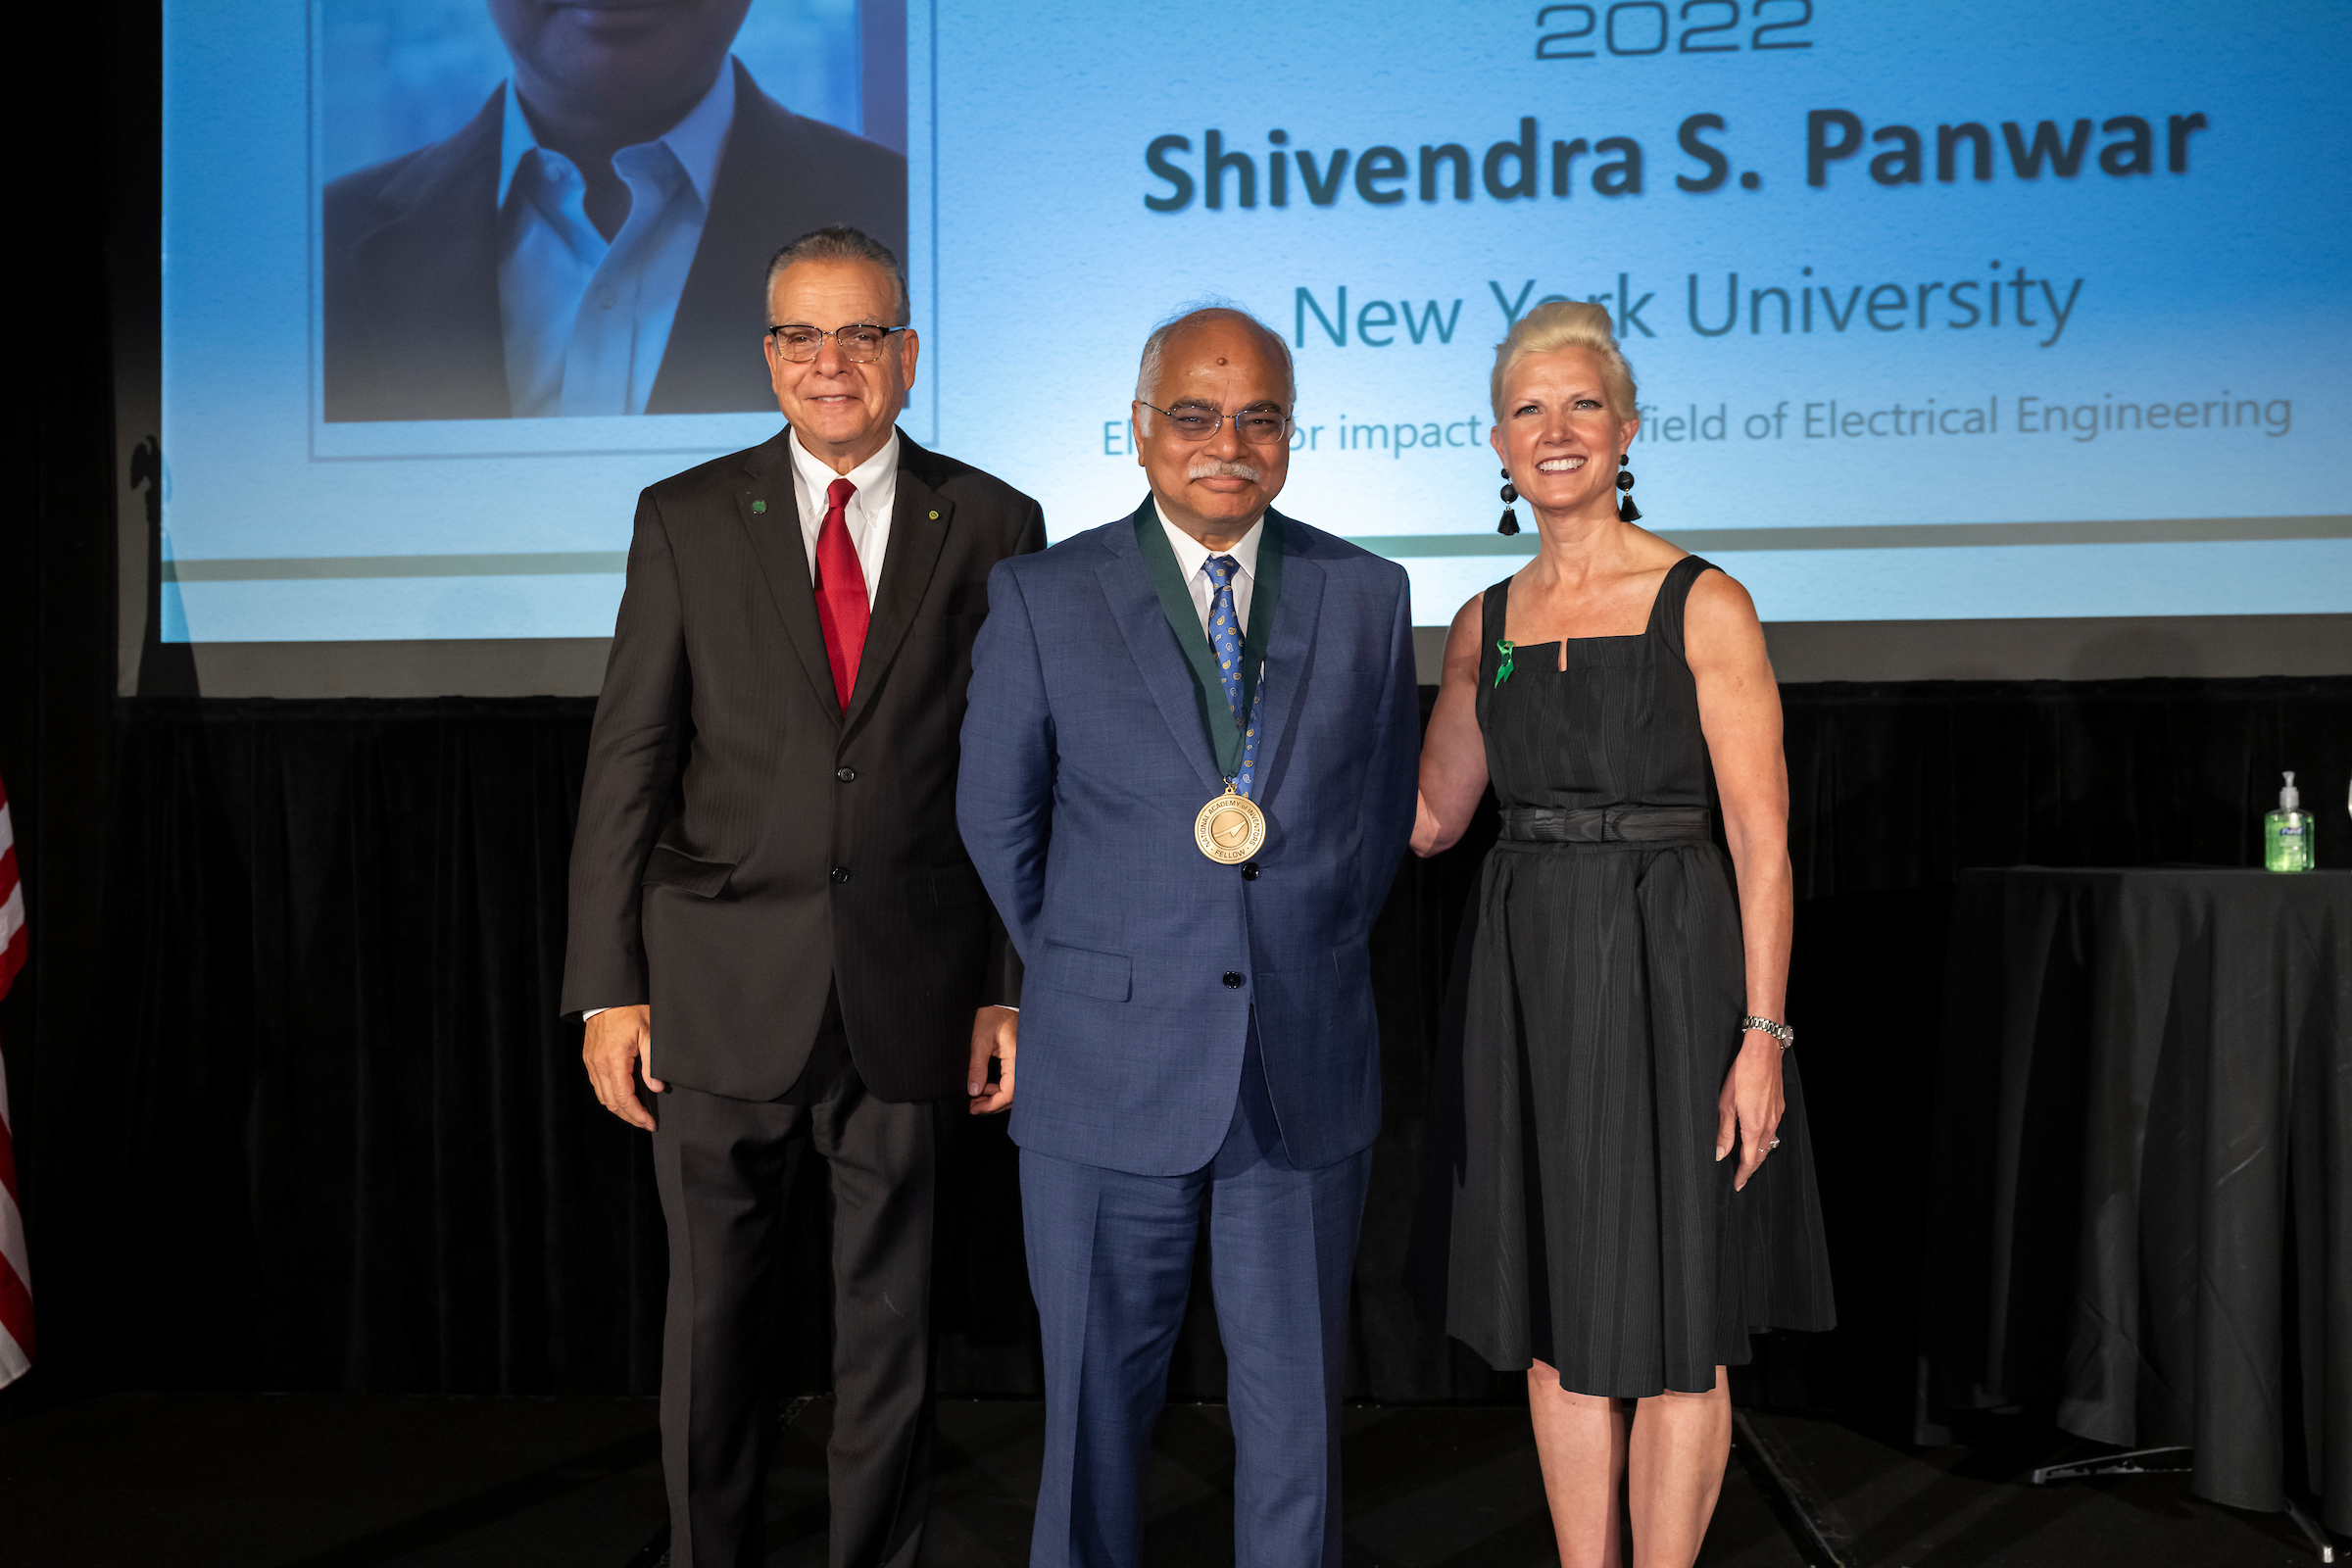 Shivendra Panwar named a Fellow of the National Academy of Inventors